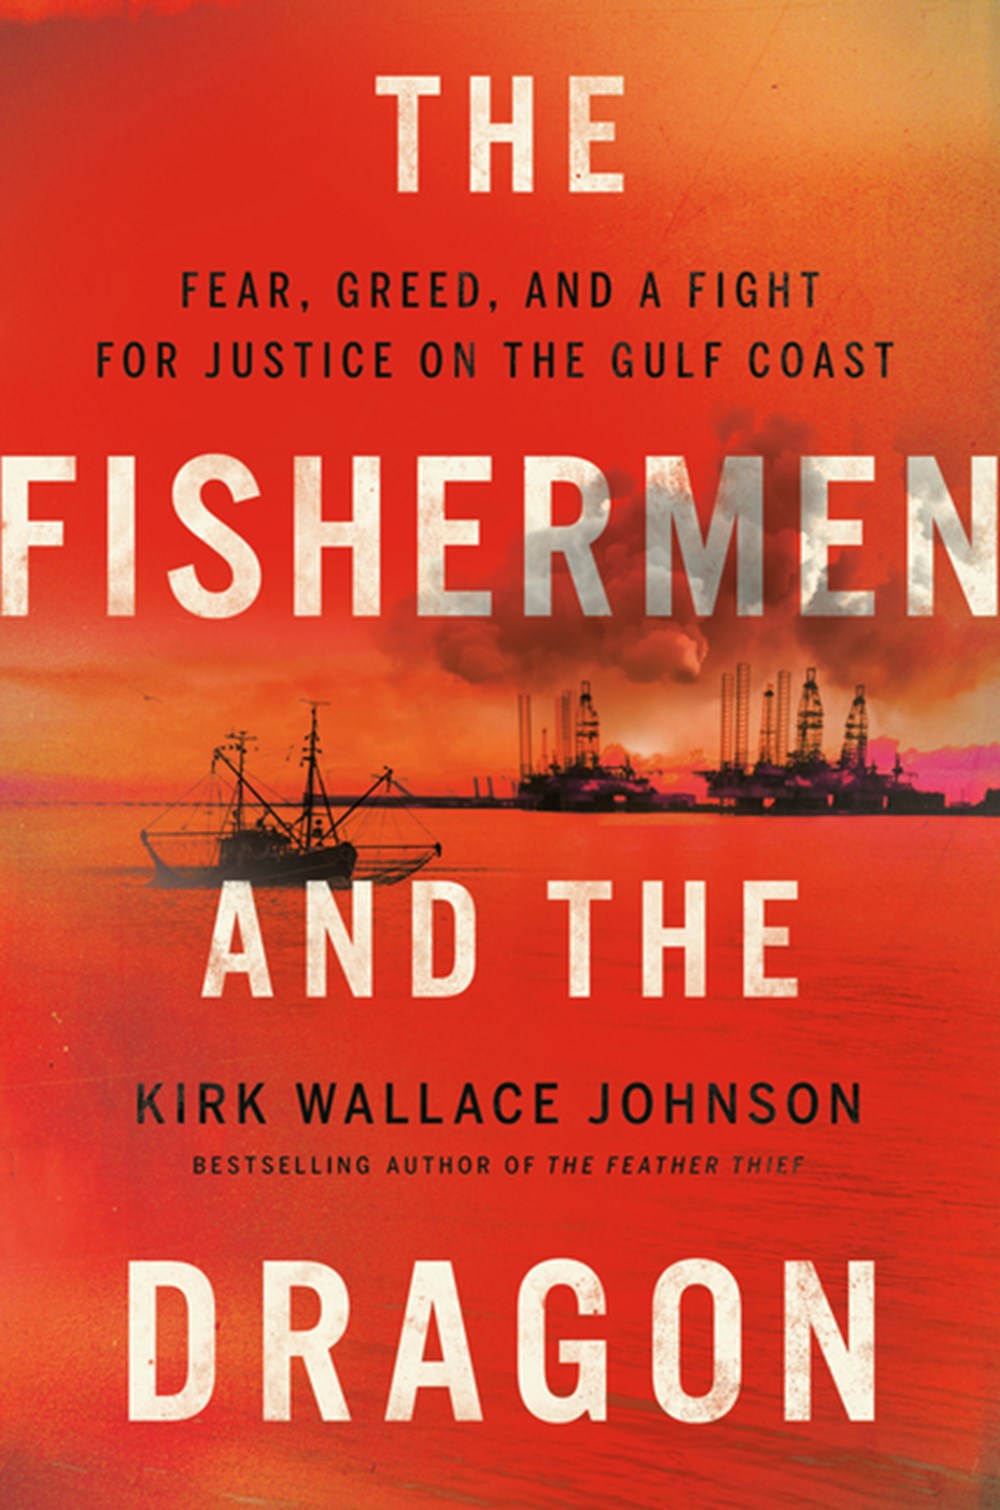 Fishermen and the Dragon: Fear, Greed, and a Fight for Justice on the Gulf Coast